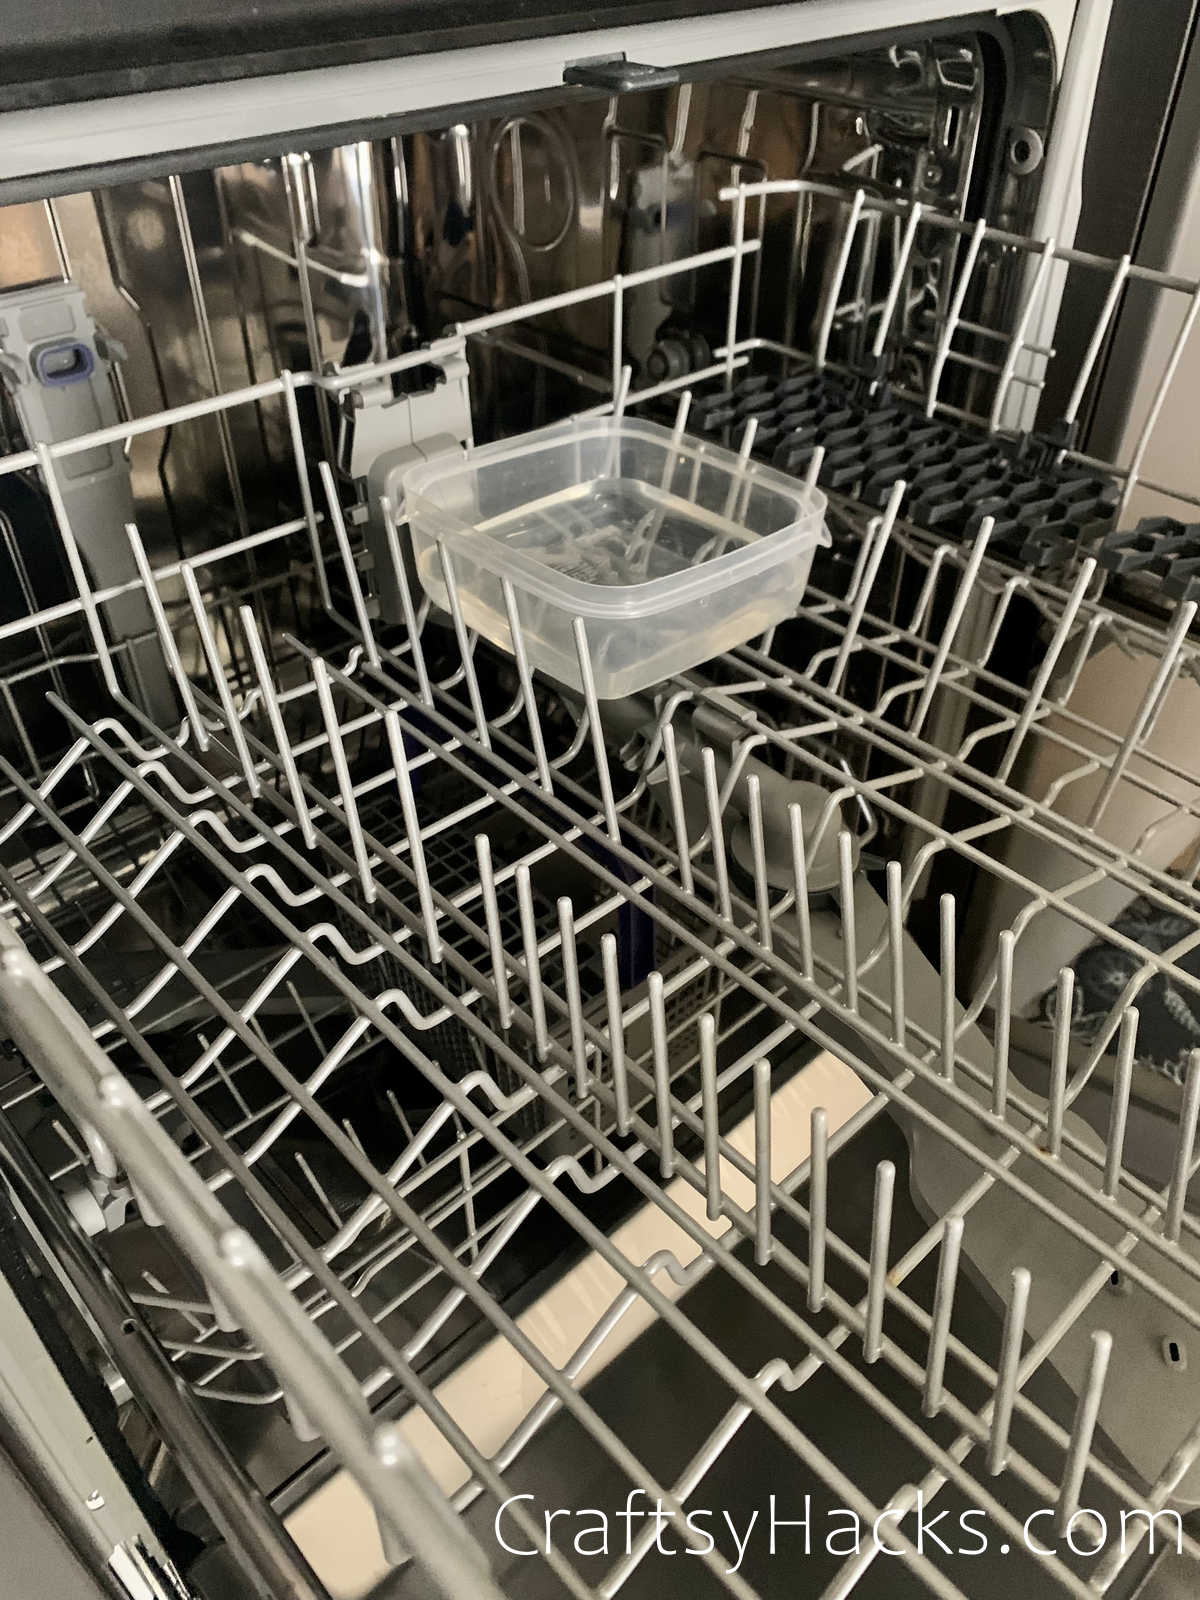 disinfect dishwasher with vinegar